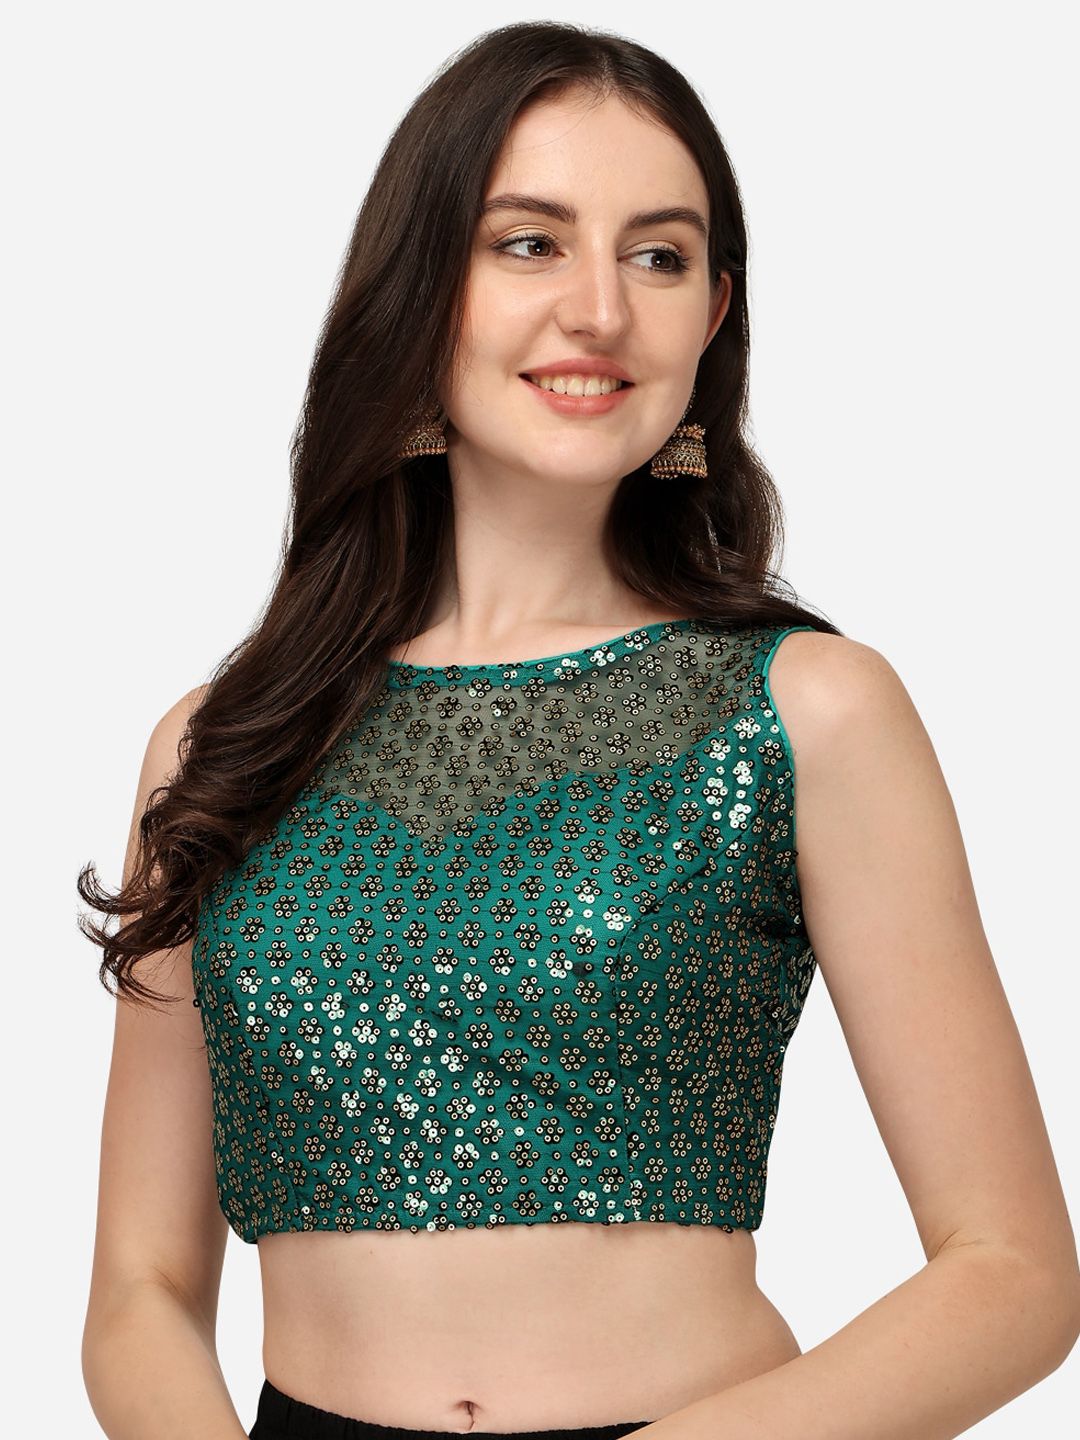 Amrutam Fab Green Sequences Embroidered Net Saree Blouse Price in India